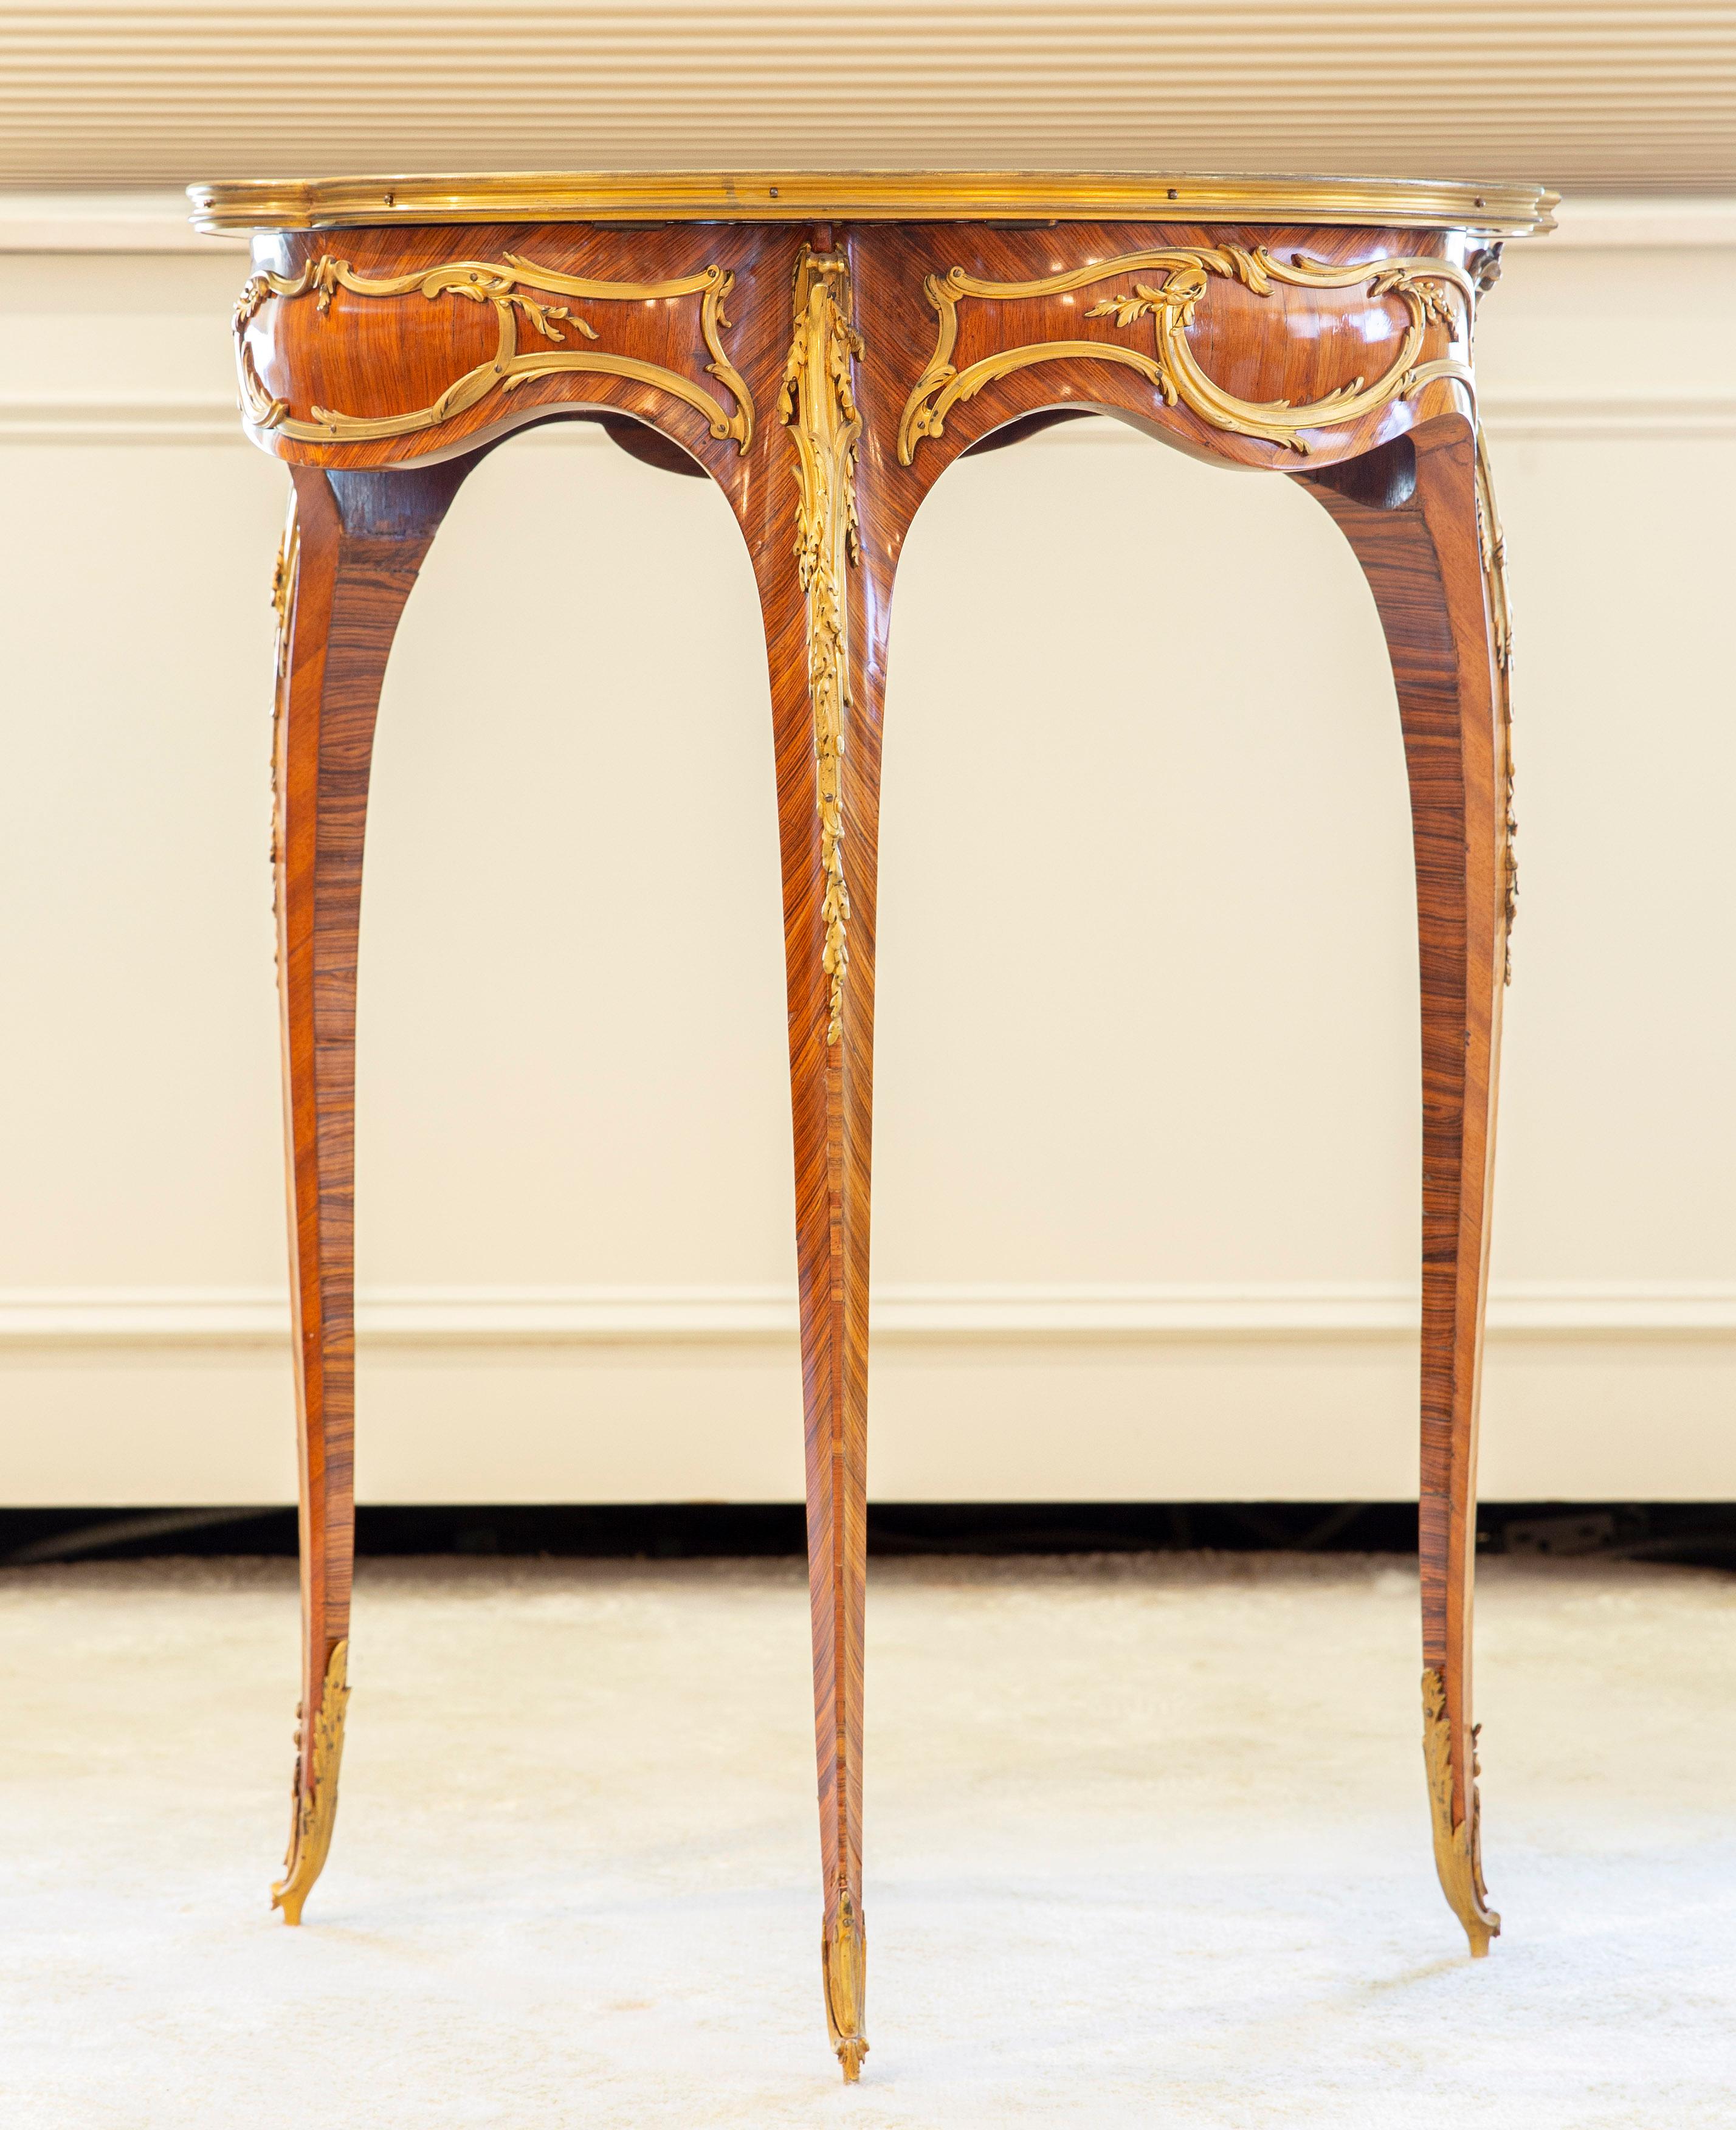 20th Century A Very Special Gilt Bronze Mounted Marquetry “Coquille” Table by François Linke For Sale